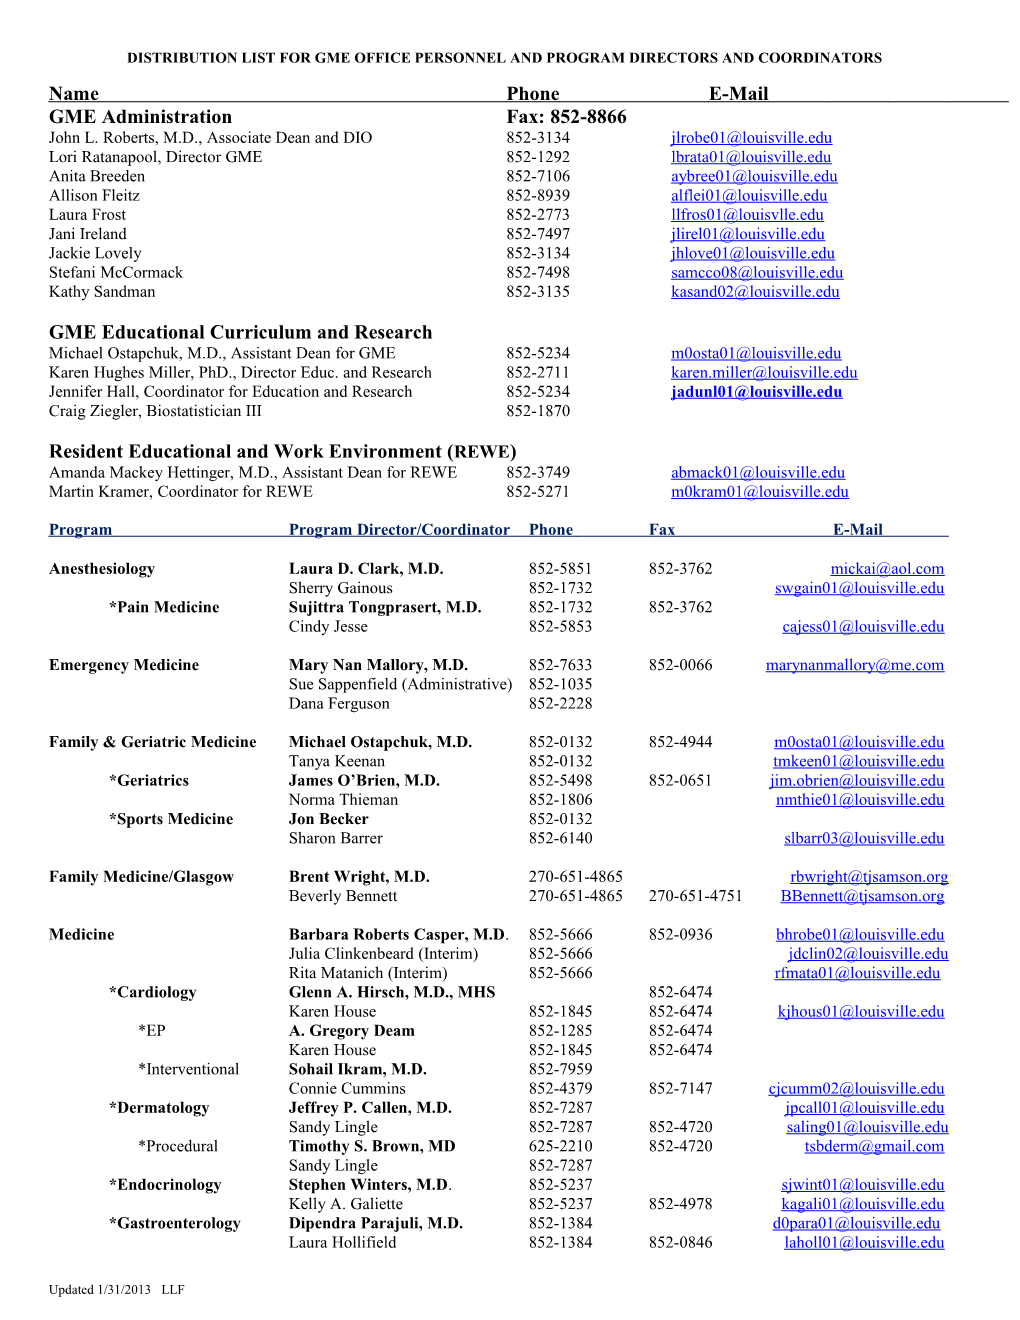 Distribution List for Gme Office Personnel and Program Directors and Coordinators